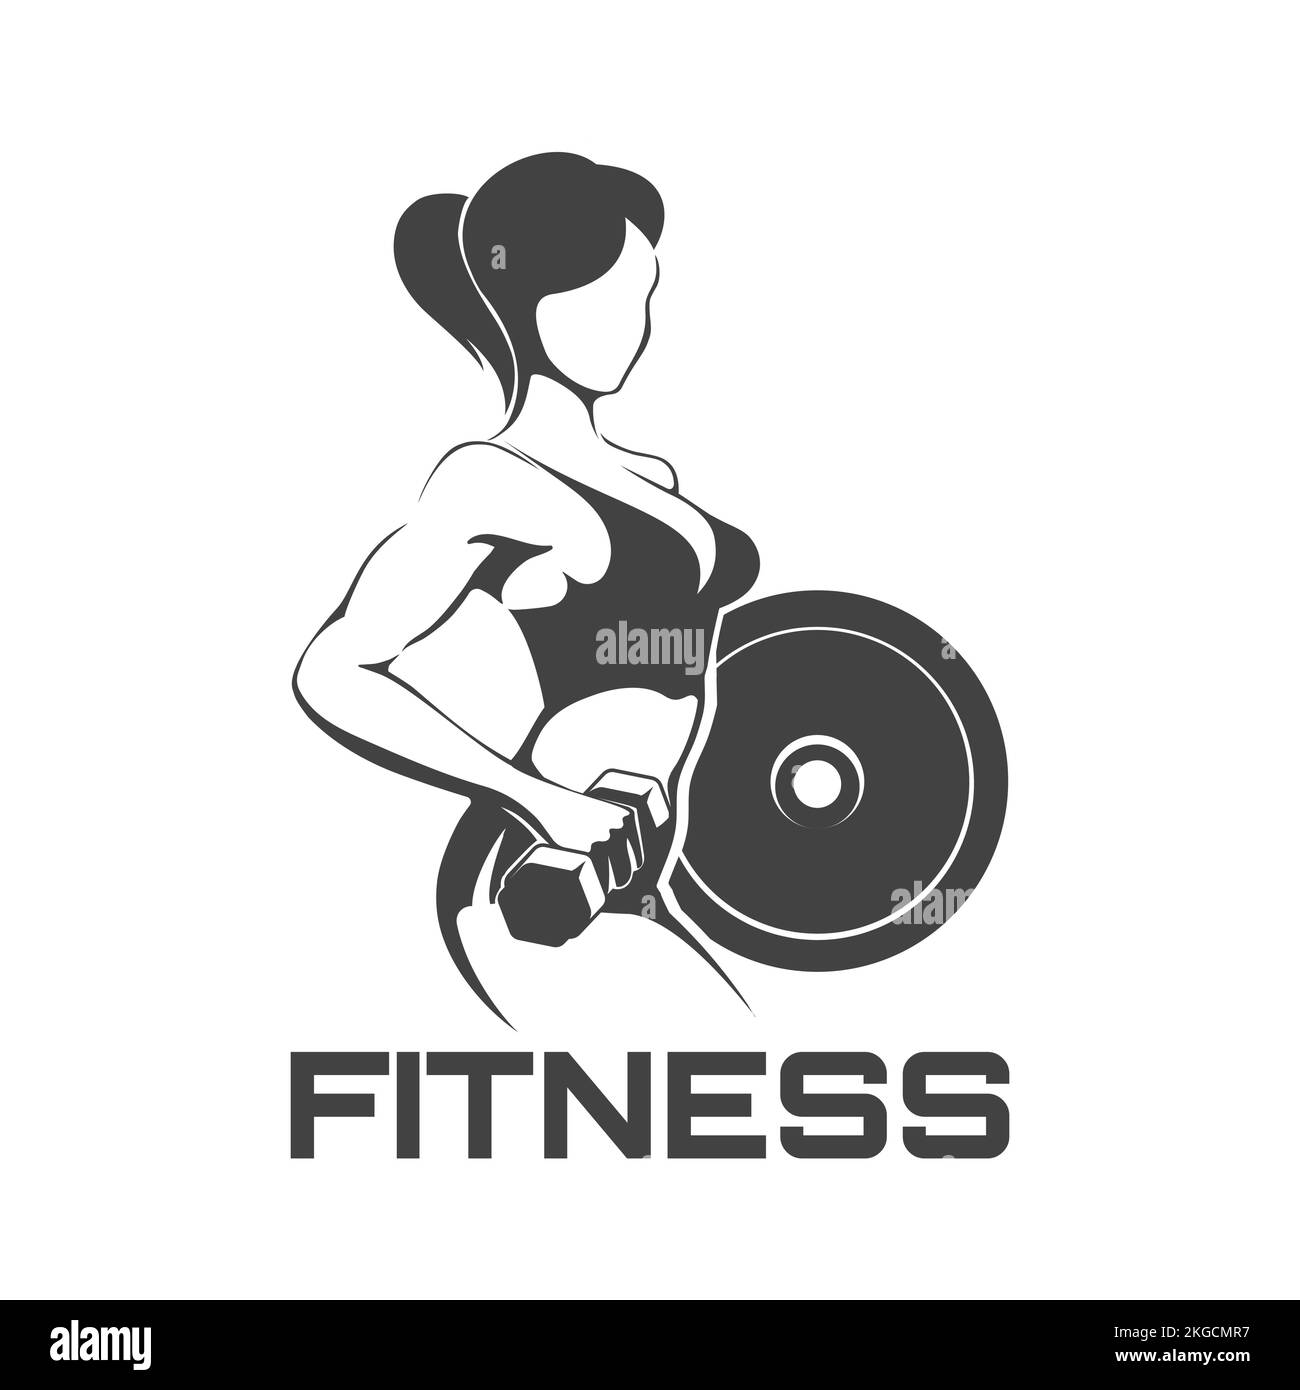 Fitness club logo or emblem with woman silhouette. Woman holds dumbbells. Isolated on white background. Stock Vector